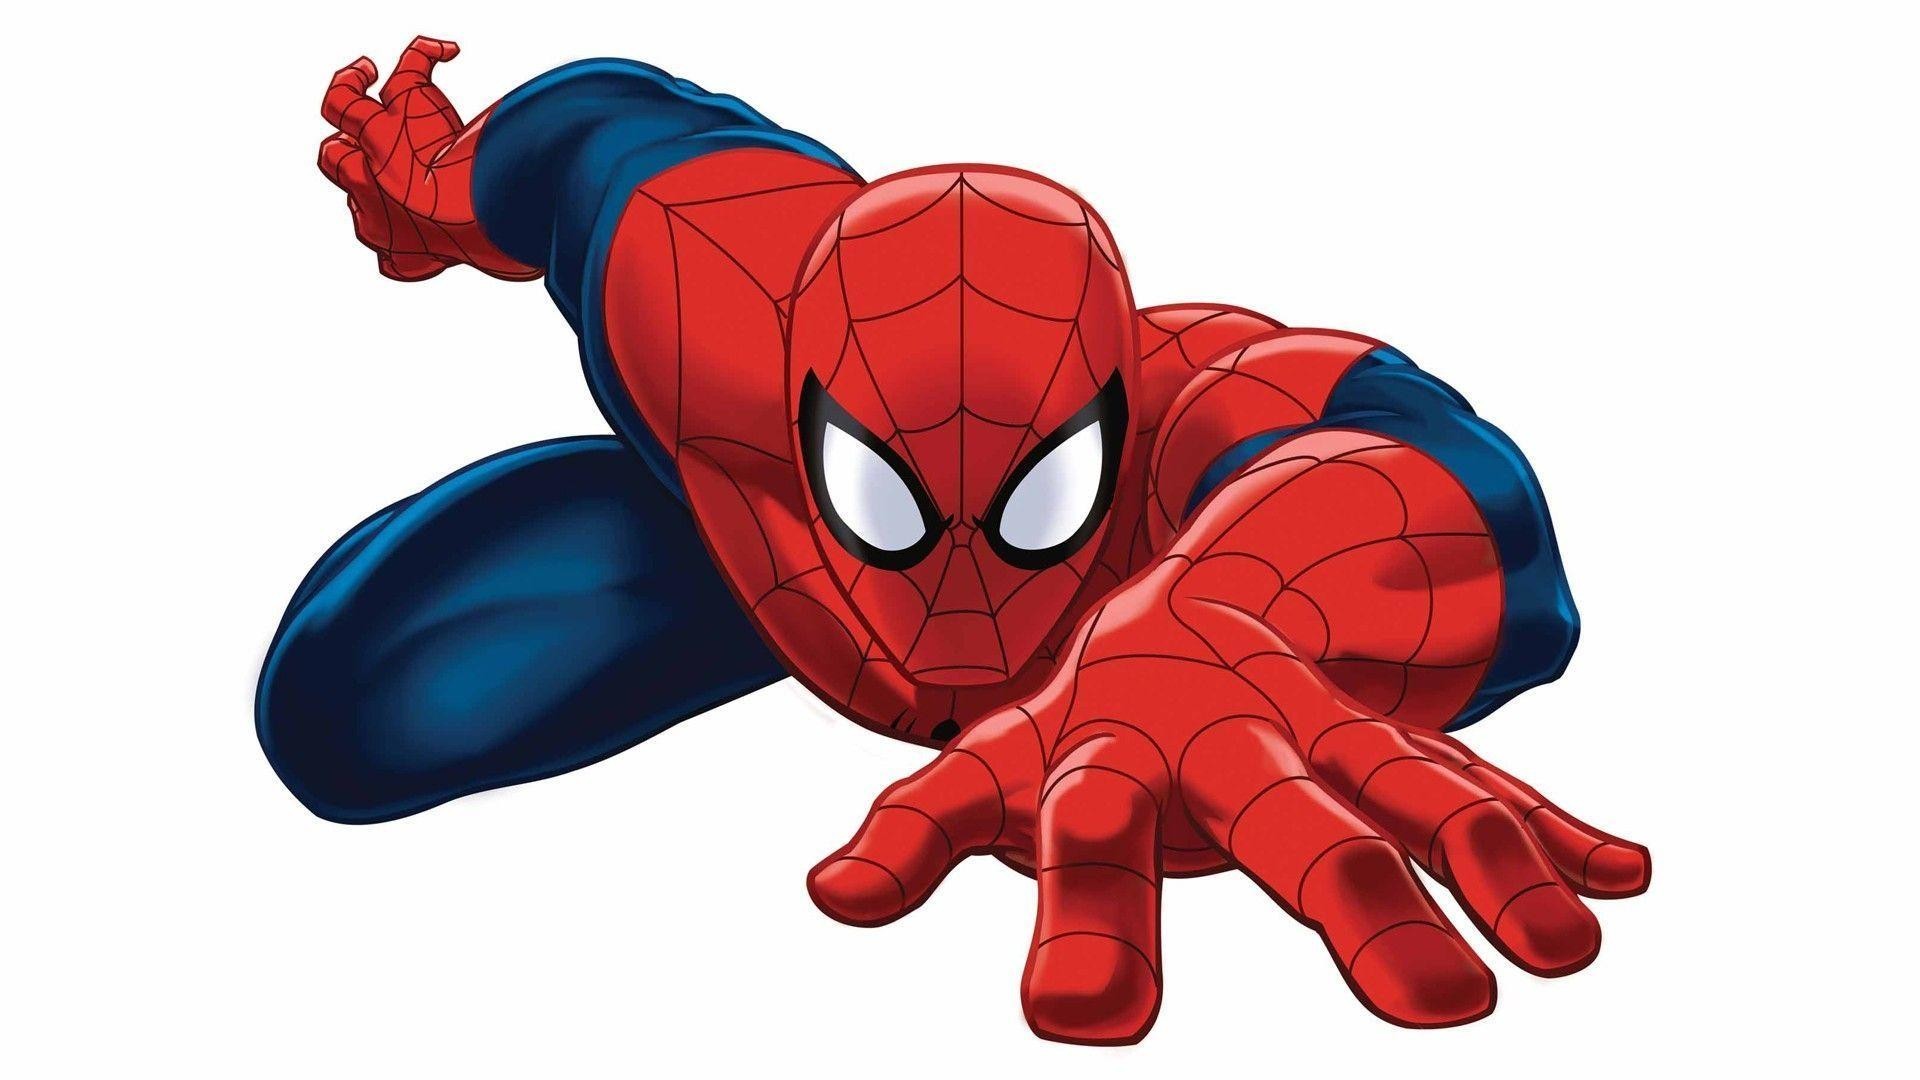 How popular is Spiderman in Marvel?